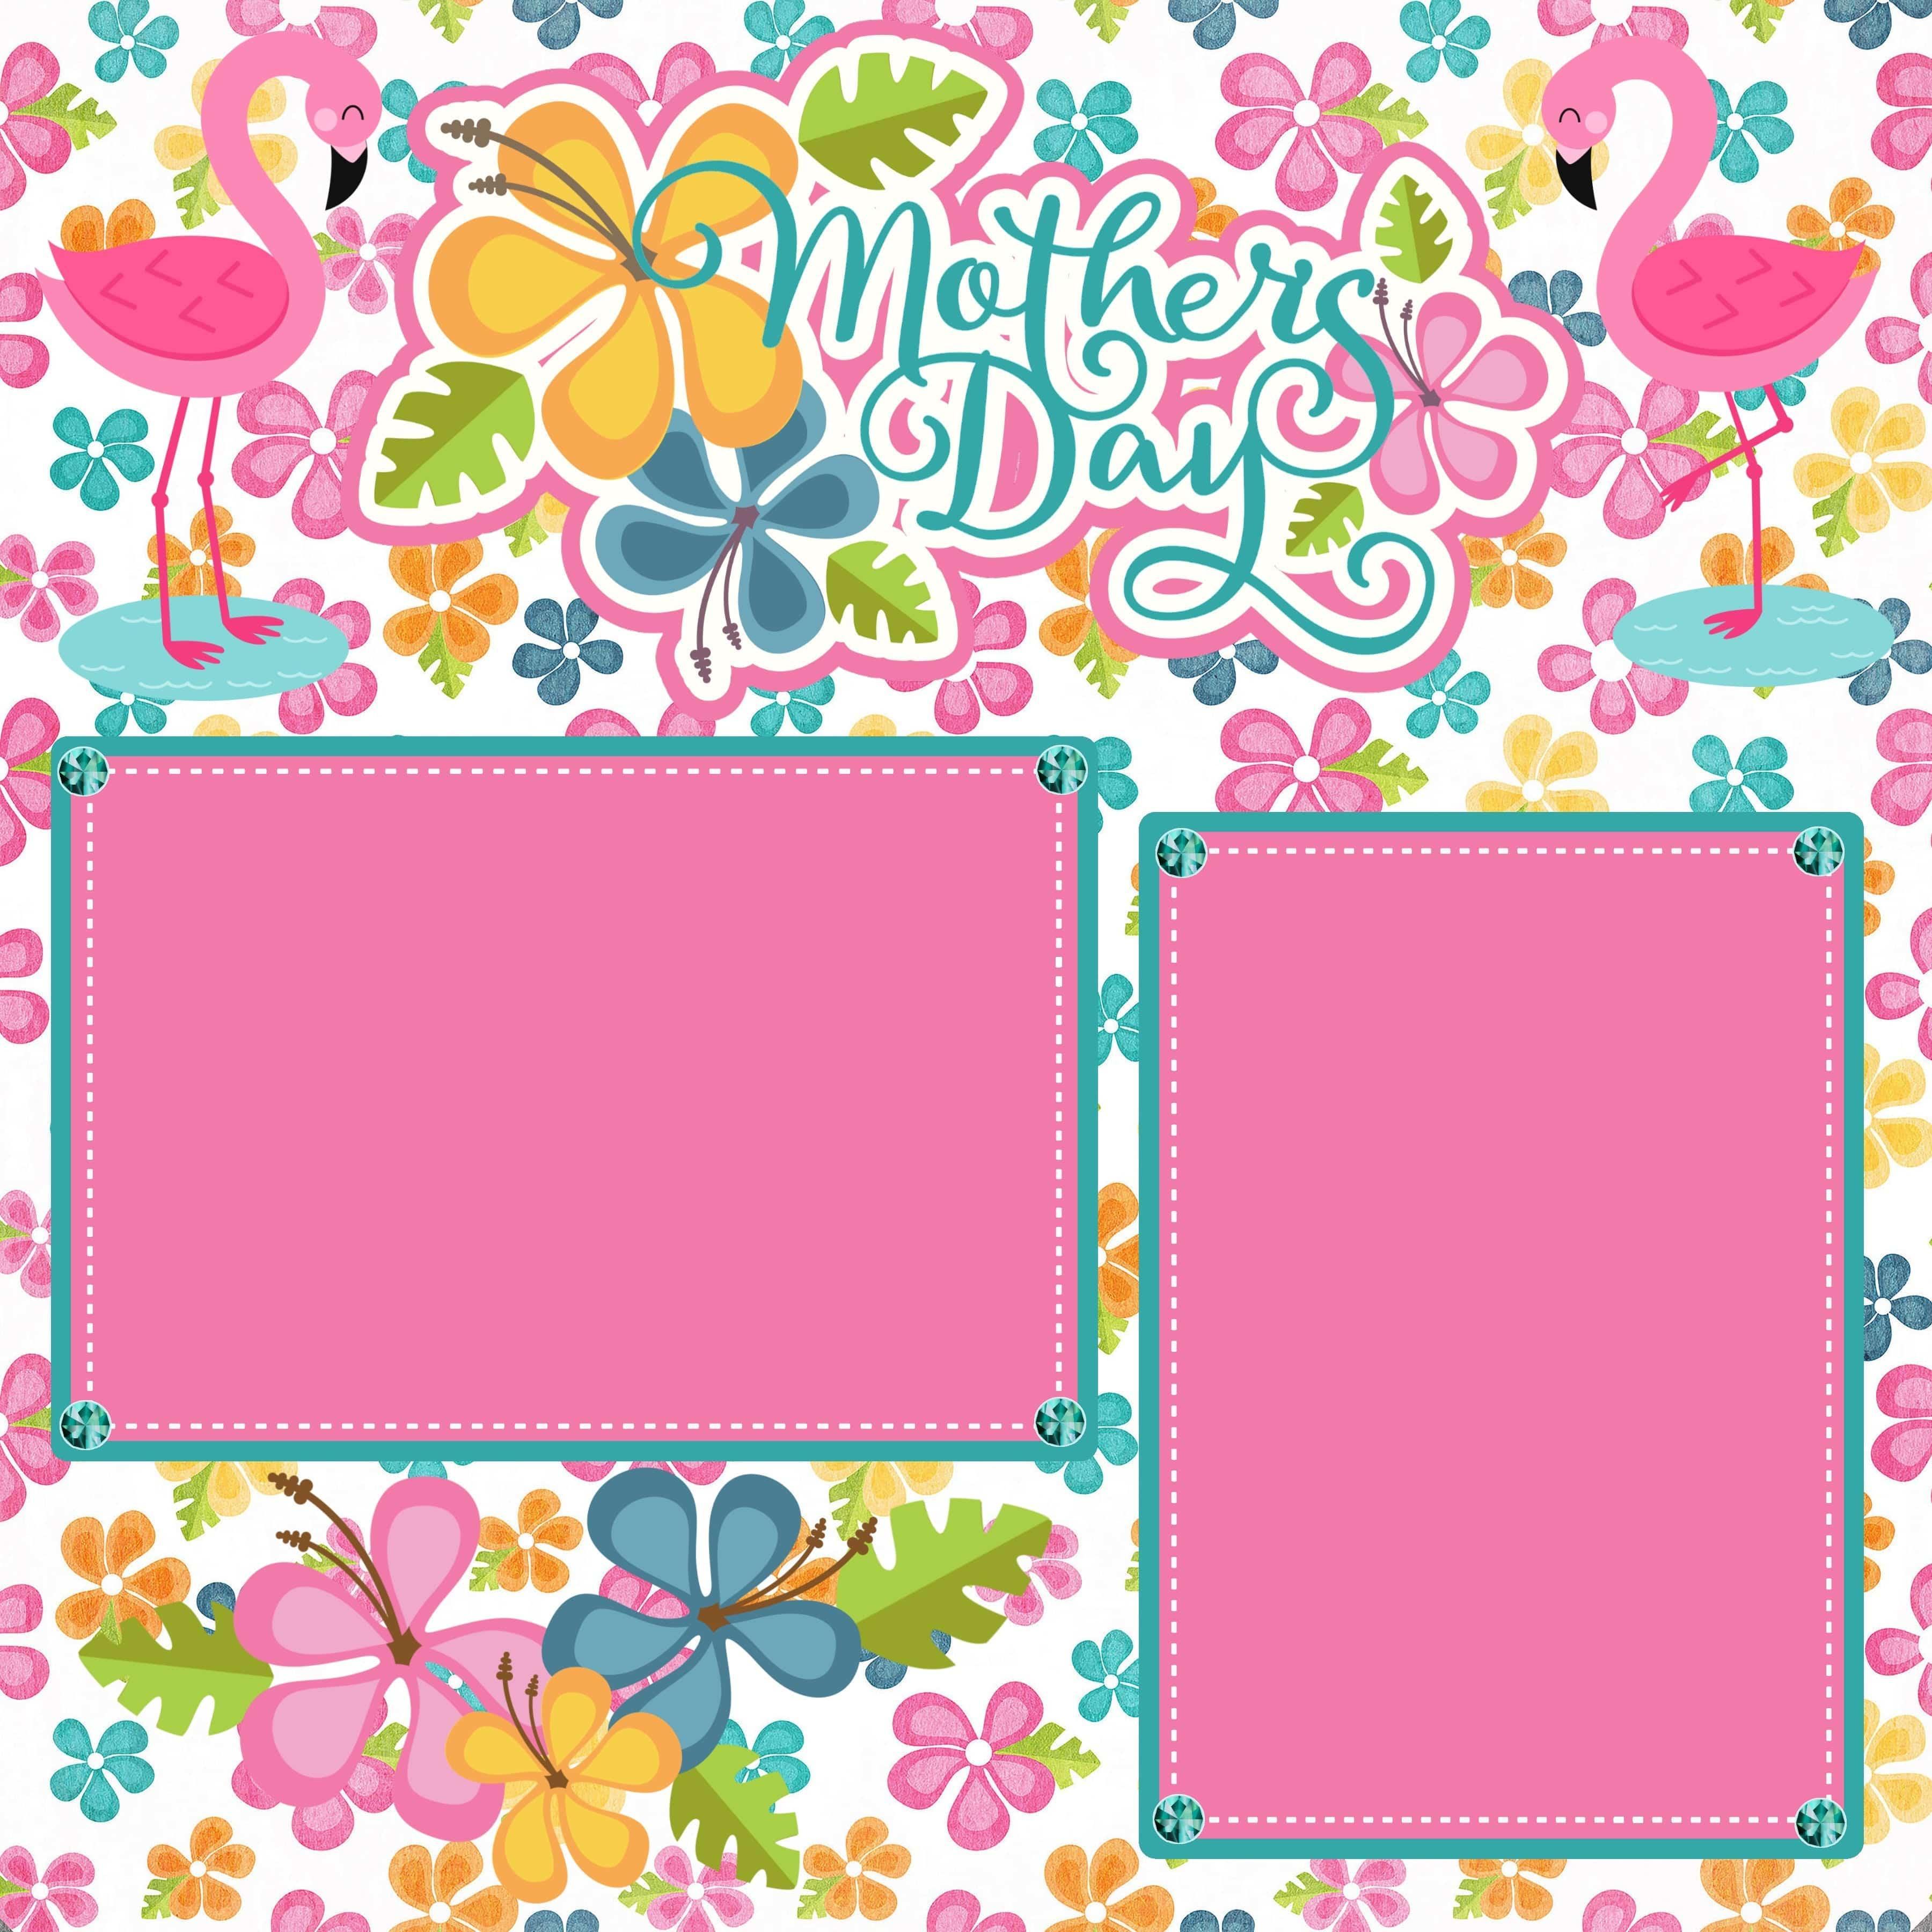 Tropical Mother's Day (2) - 12 x 12 Premade, Printed Scrapbook Pages by SSC Designs - Scrapbook Supply Companies